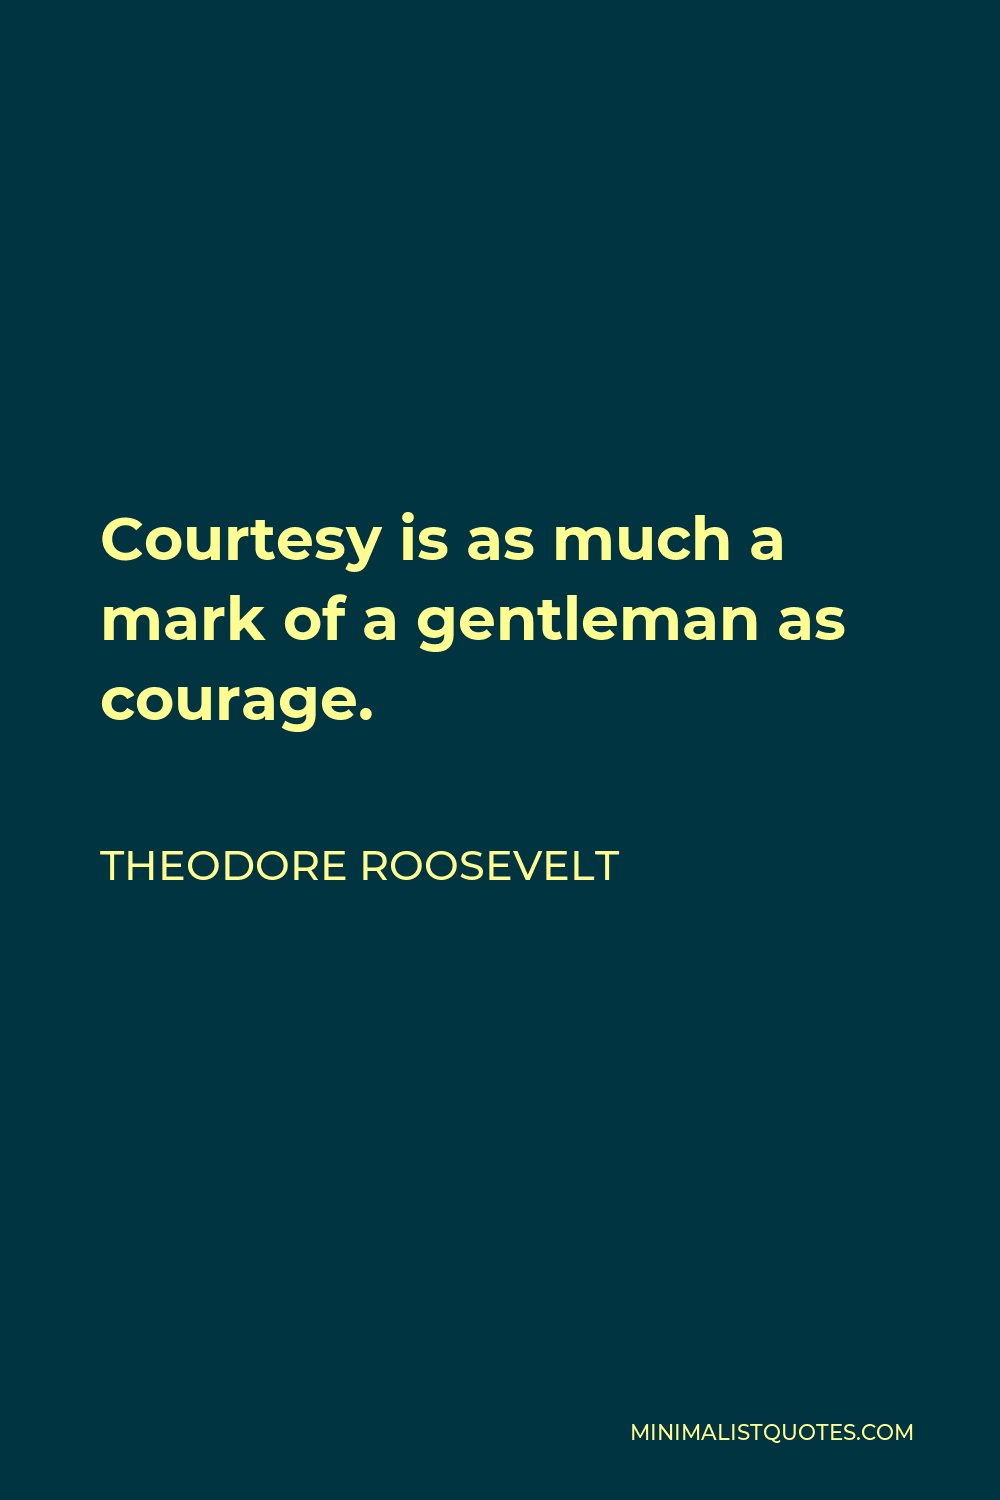 Theodore Roosevelt Quote - Courtesy is as much a mark of a gentleman as courage.